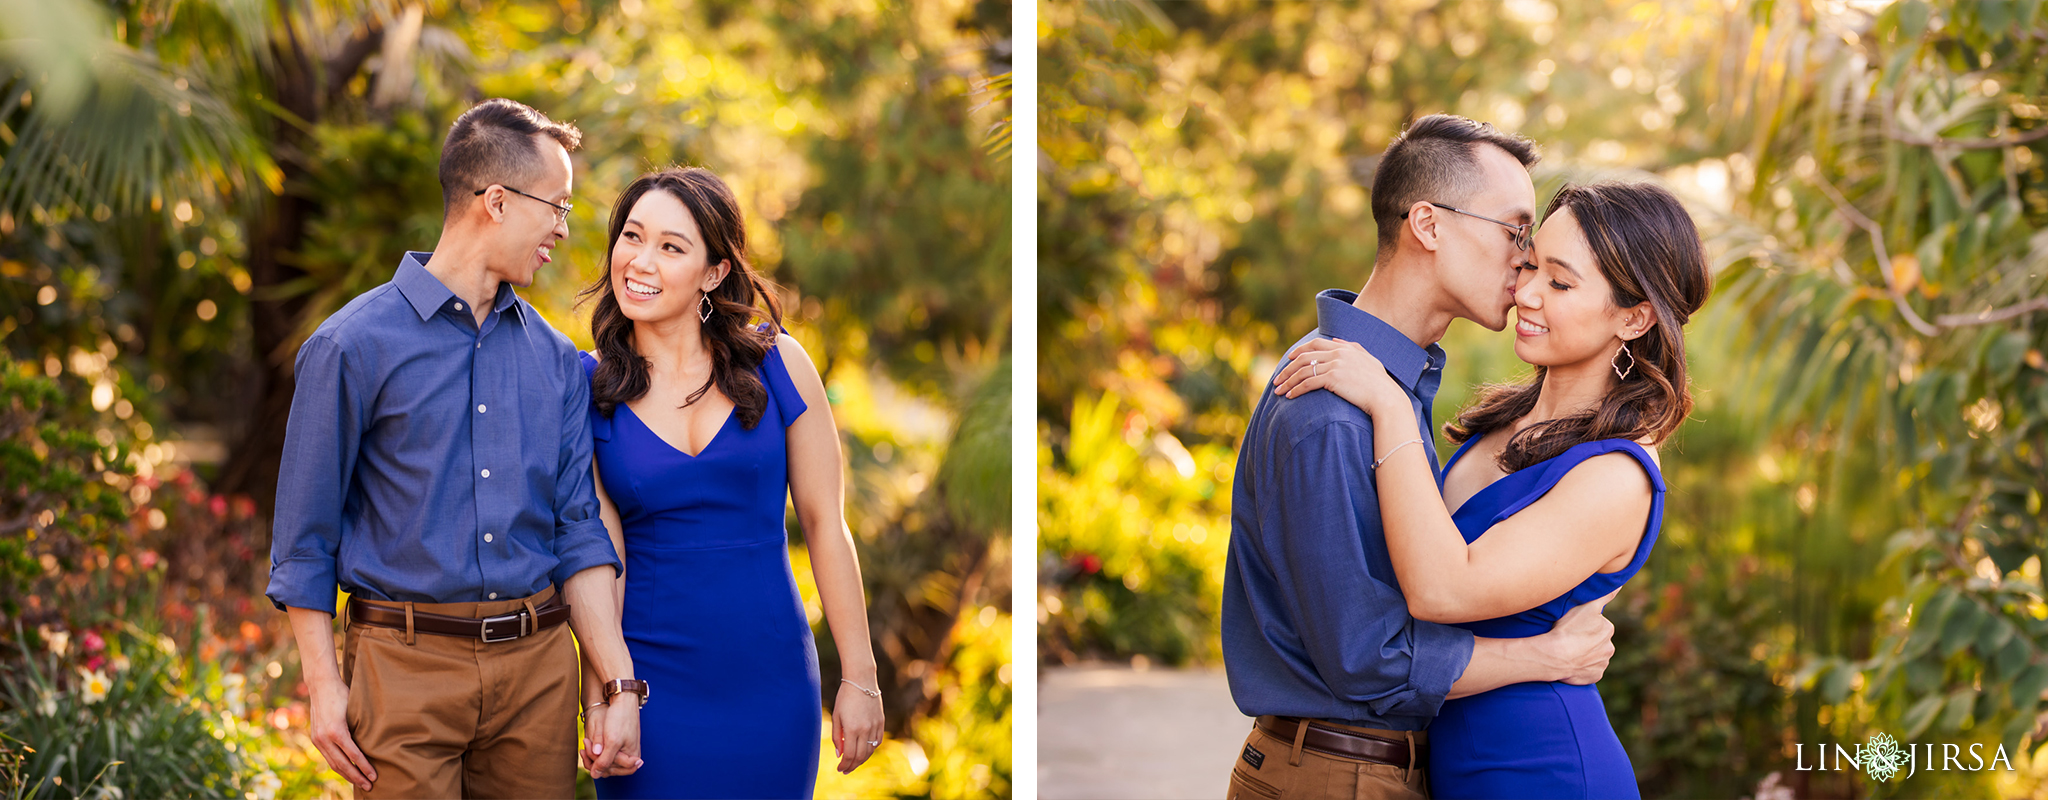 02 Newport Beach Vineyards and Winery Engagement Photography